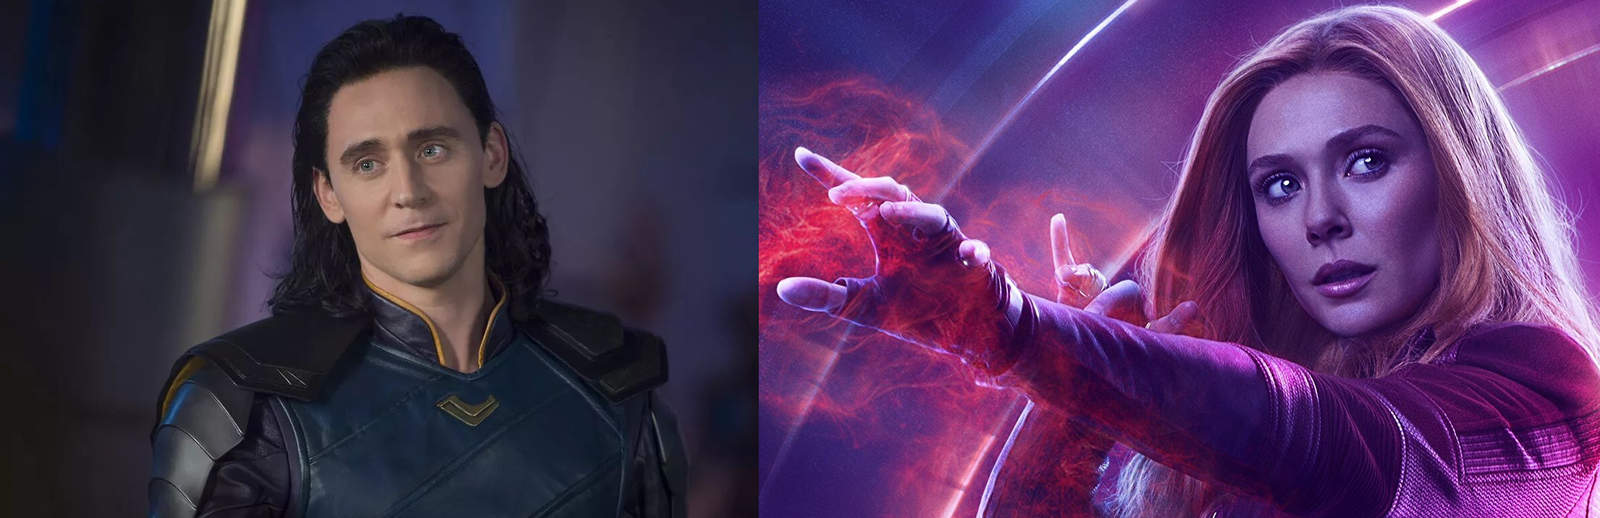 Streaming service Disney will release series with Loki and Scarlet Witch - Serials, Marvel, Loki, Scarlet Witch, Walt disney company